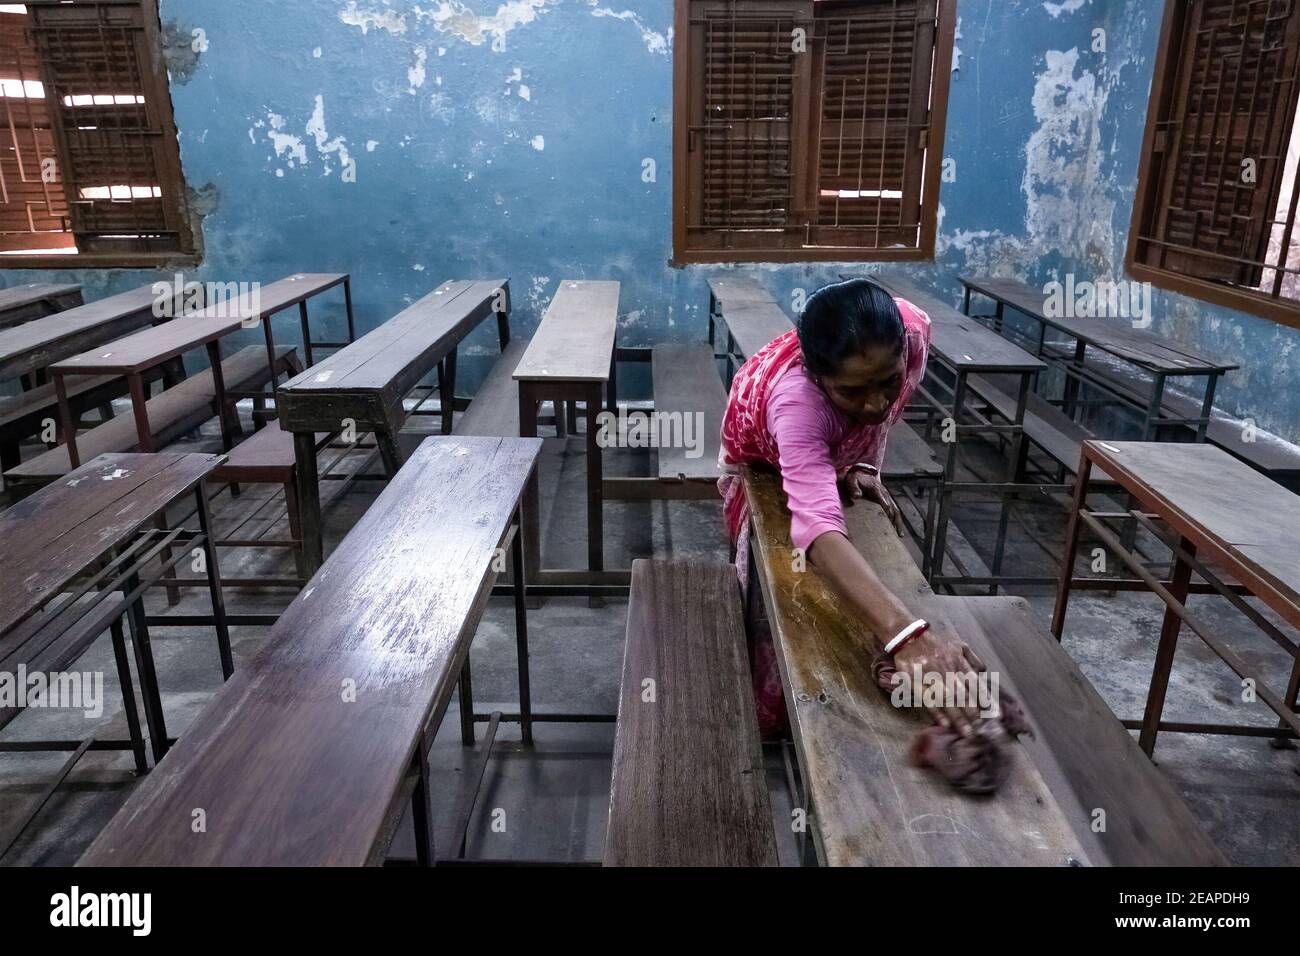 A staff member of Madhyamgram high school seen cleaning benches as the school prepares to reopen. The west Bengal government has decided to reopen schools across the state with proper covid 19 guidelines from 12th February. The schools will reopen for Classes 9 to 12 after ten months of being shut since March 16, 2020 due to the coronavirus pandemic. The state government has said that students will only be allowed to attend offline classes with parental consent. (Photo by Dipayan Bose / SOPA Images/Sipa USA) Stock Photo